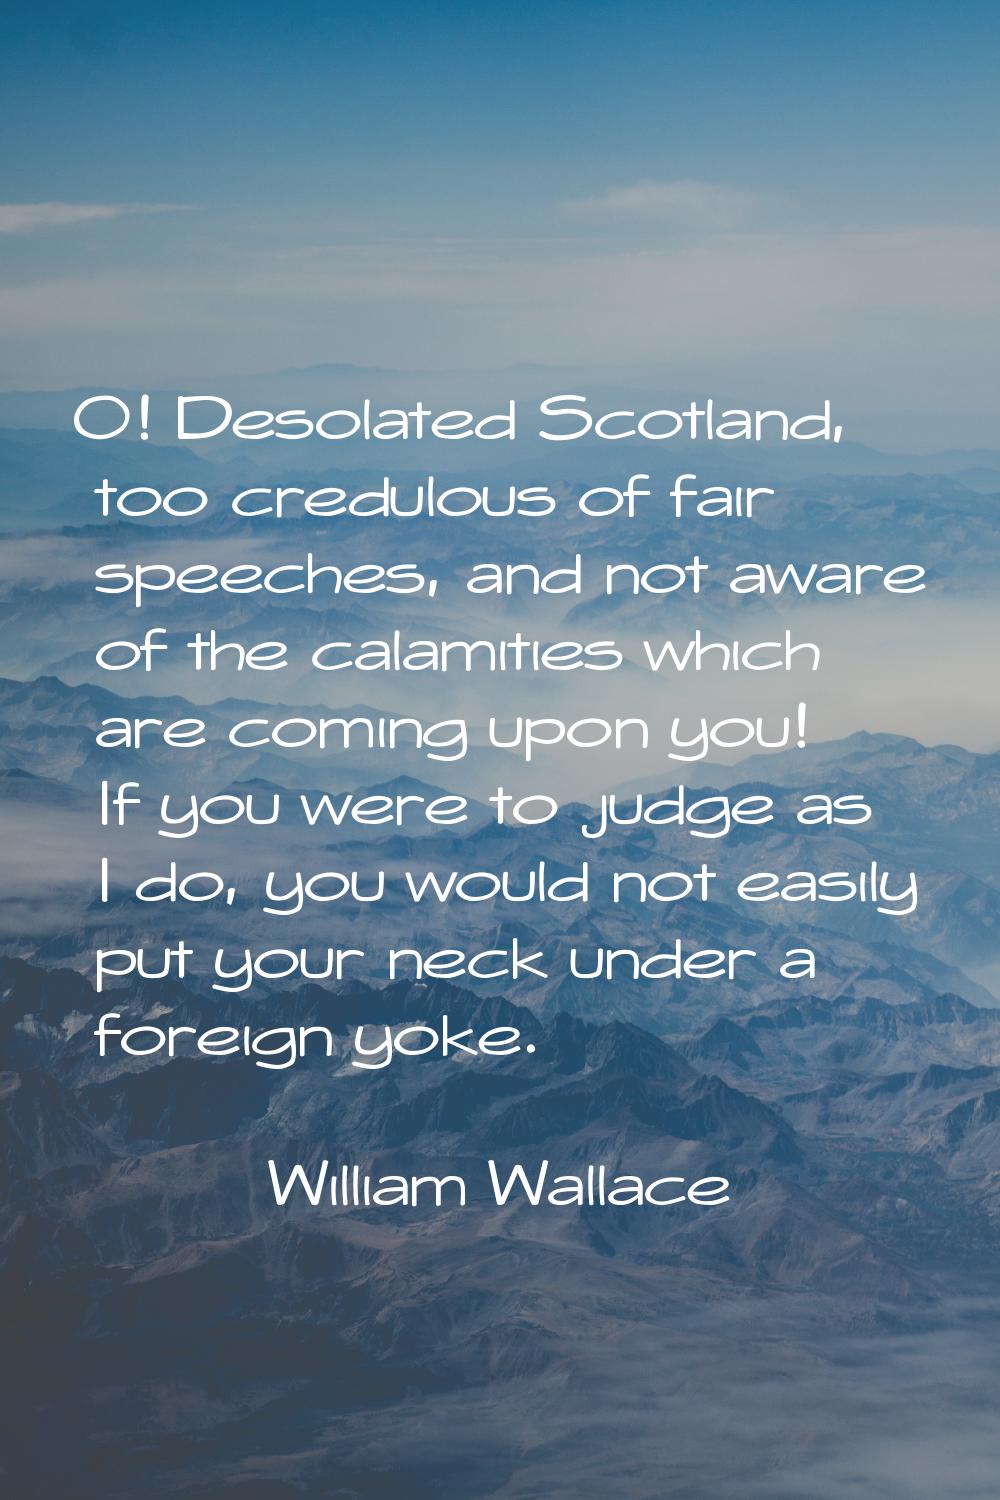 O! Desolated Scotland, too credulous of fair speeches, and not aware of the calamities which are co